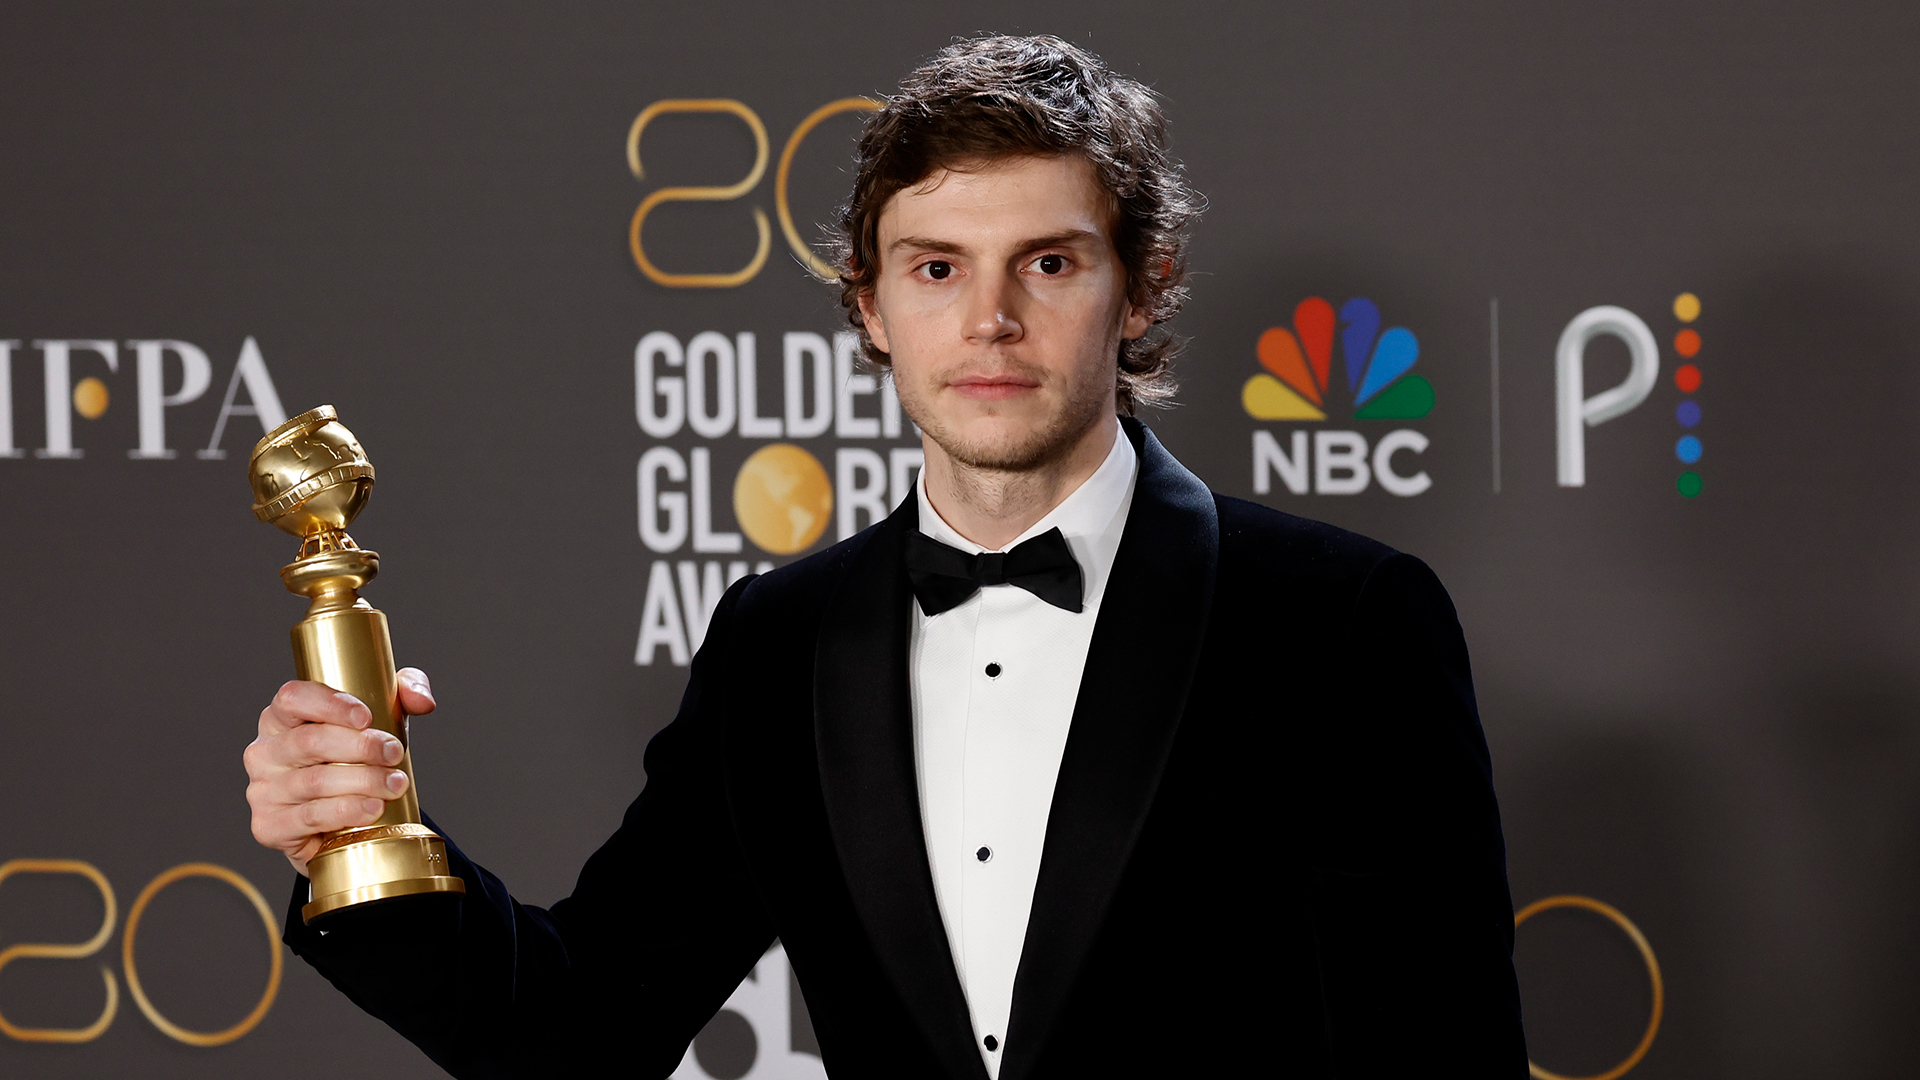 Jeffrey Dahmer 30 Years Later: From Evan Peters' Portrayal to